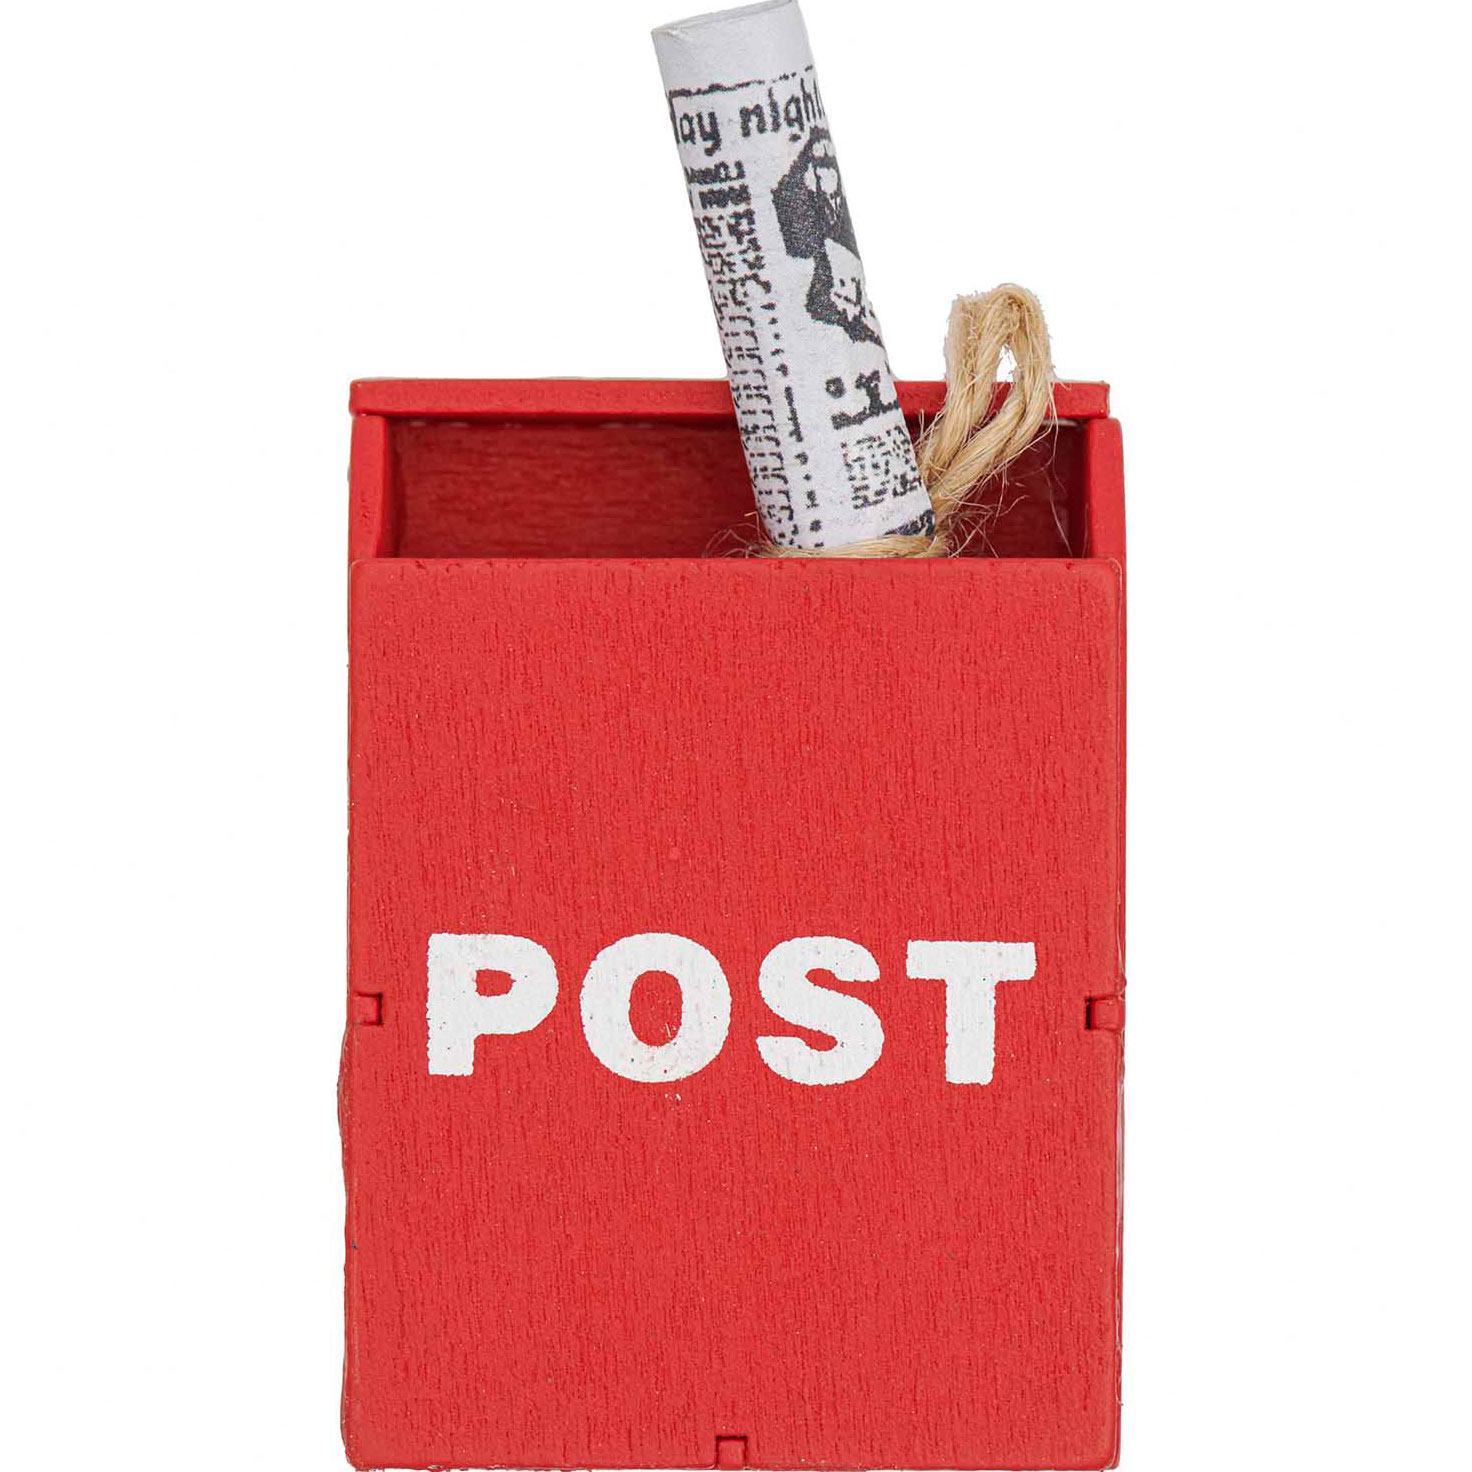 Miniature Red Postbox with Newspaper